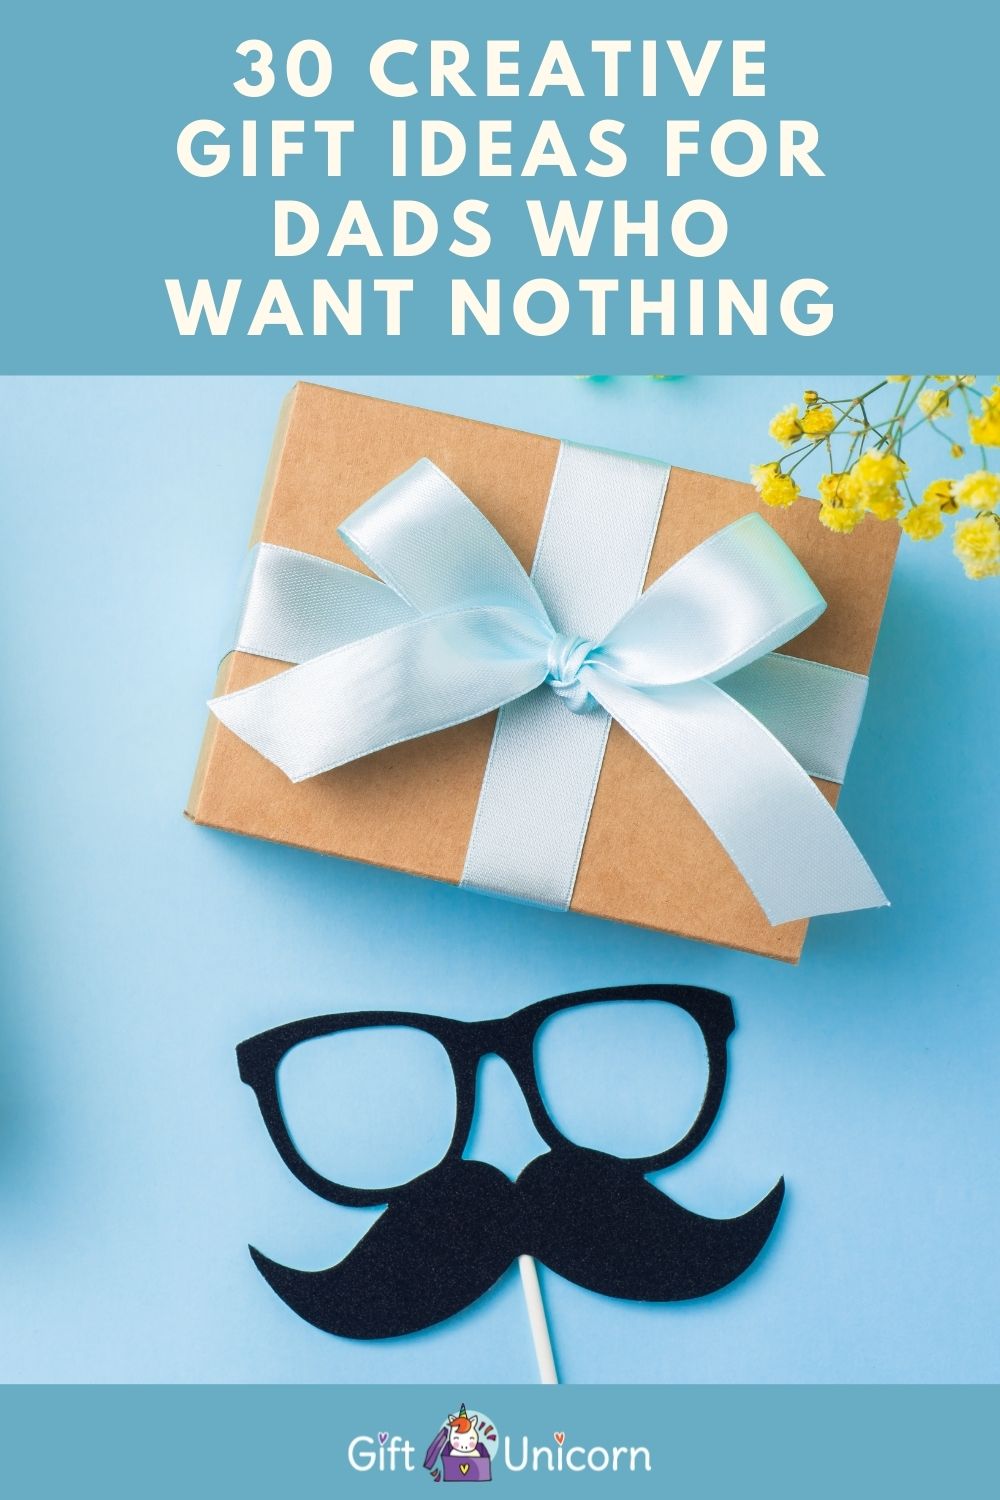 30 GIFTS FOR DADS WHO WANT NOTHING PINTEREST PIN IMAGE